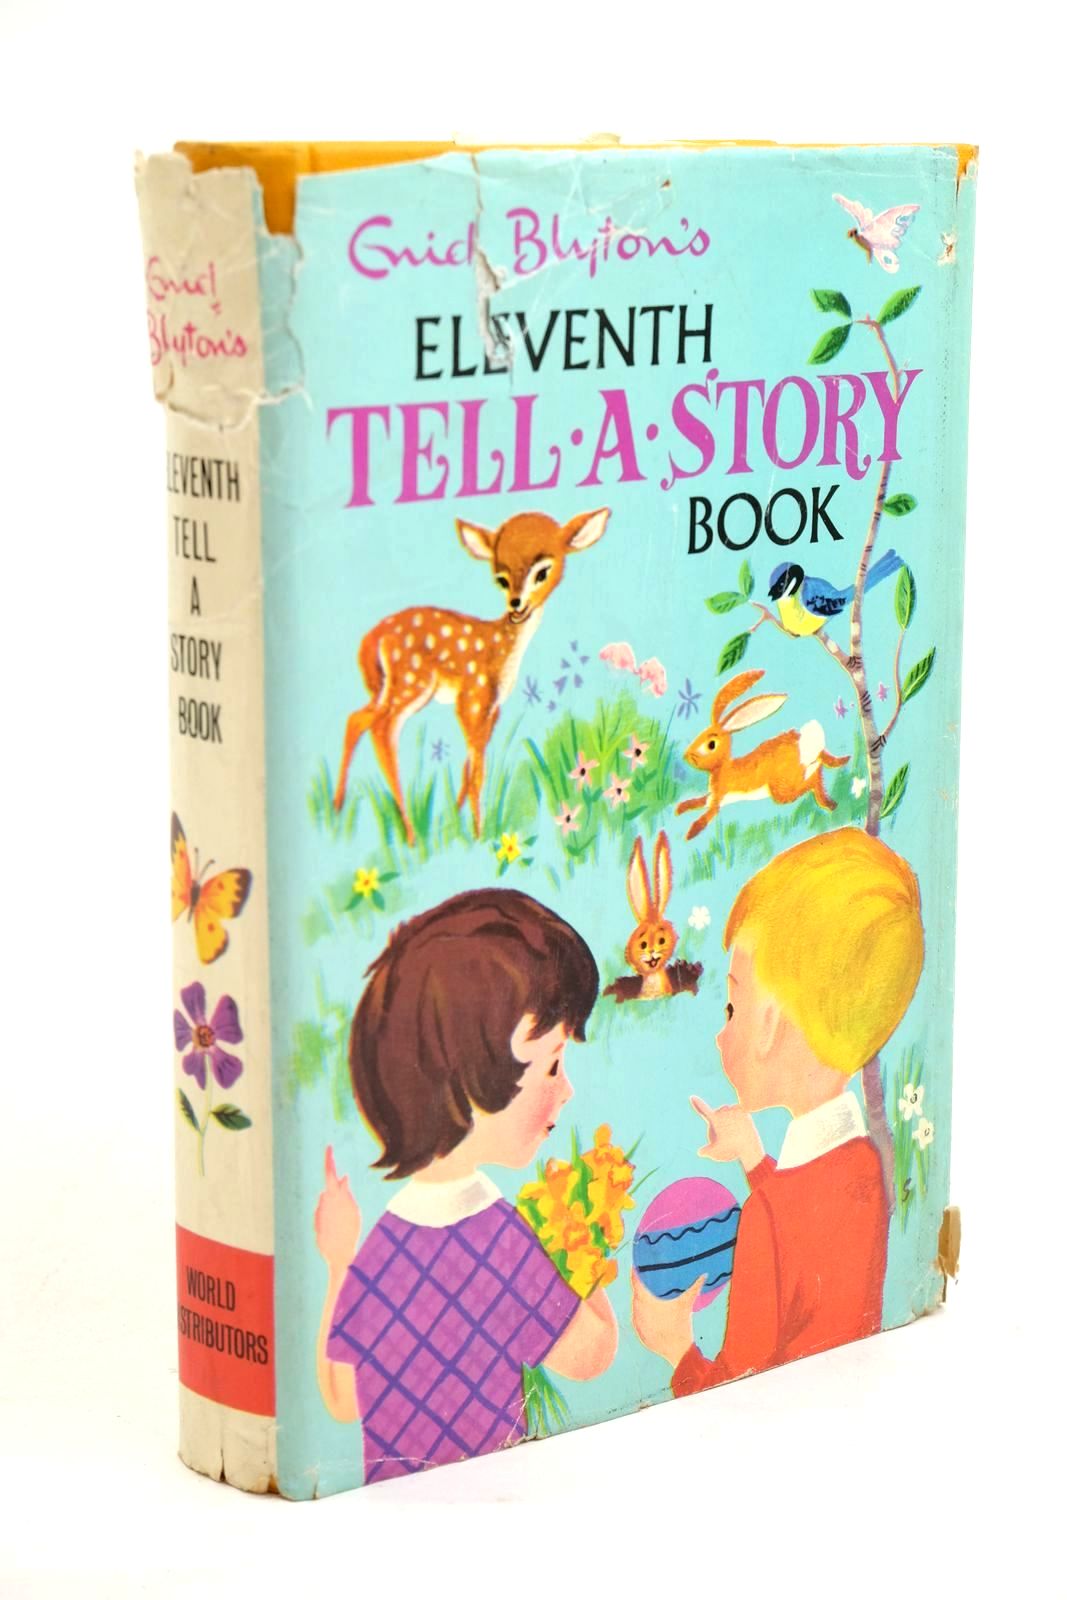 Photo of ENID BLYTON'S ELEVENTH TELL-A-STORY BOOK written by Blyton, Enid published by World Distributors Ltd. (STOCK CODE: 1321093)  for sale by Stella & Rose's Books